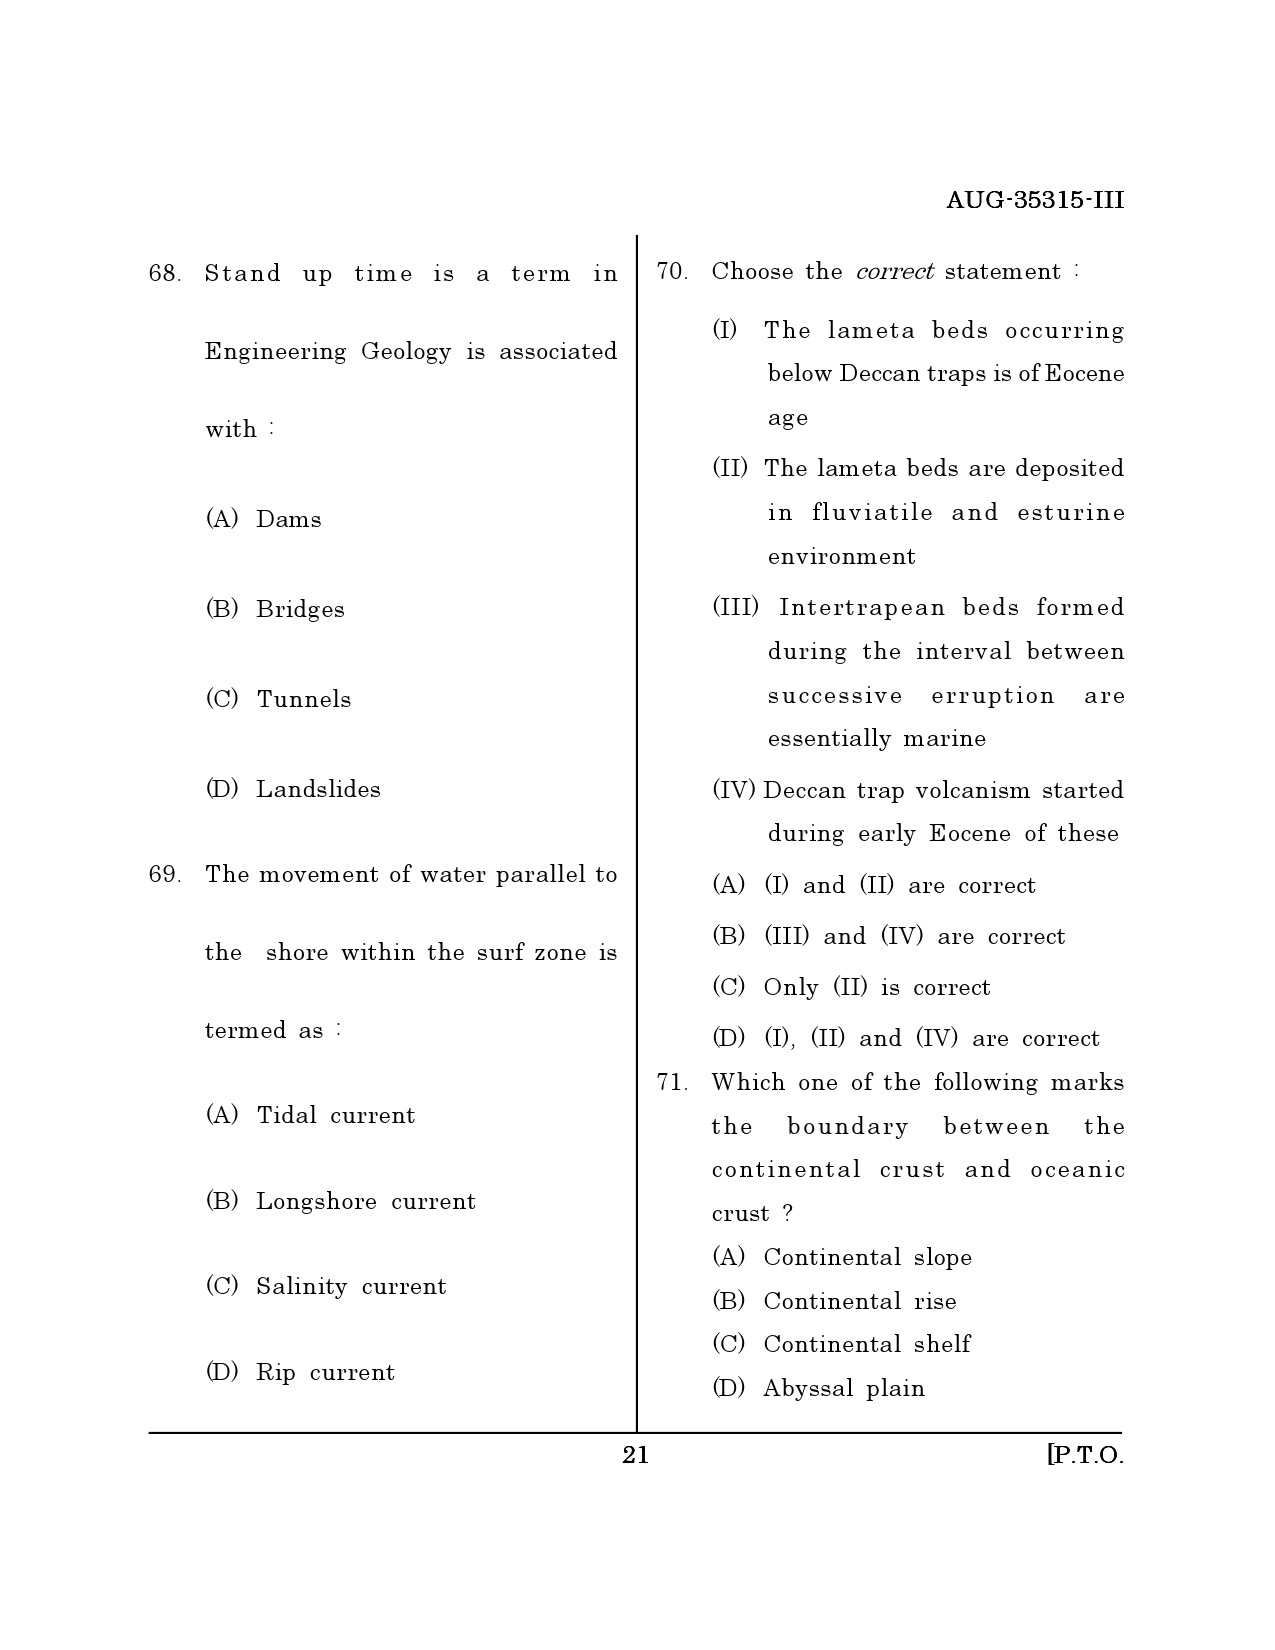 Maharashtra SET Earth Atmospheric Ocean Planetary Science Question Paper III August 2015 20